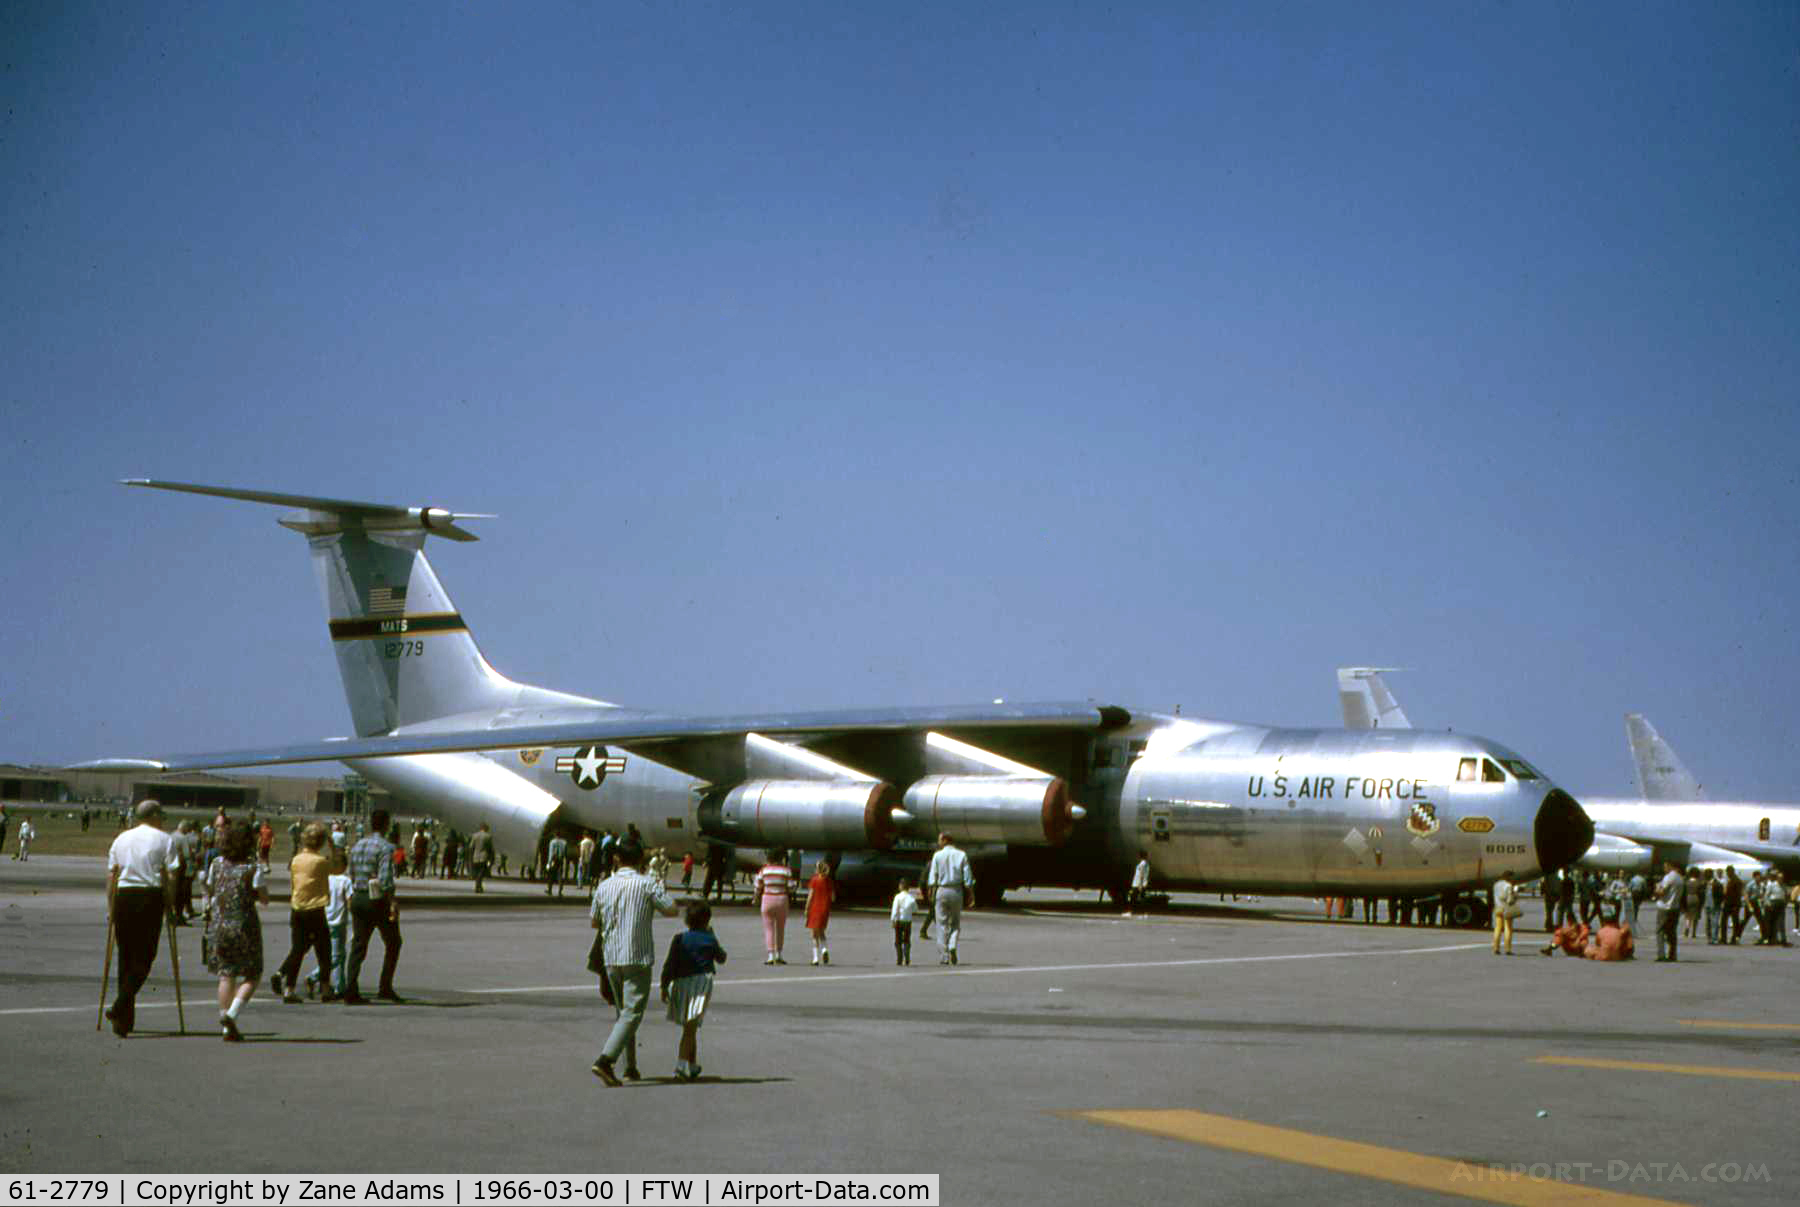 61-2779, 1961 Lockheed C-141A Starlifter C/N 300-6005, C-141A on the ramp. Taken at 1966 Air Force Assn Airshow, Carswell AFB - Photo By John Williams - published with permission.